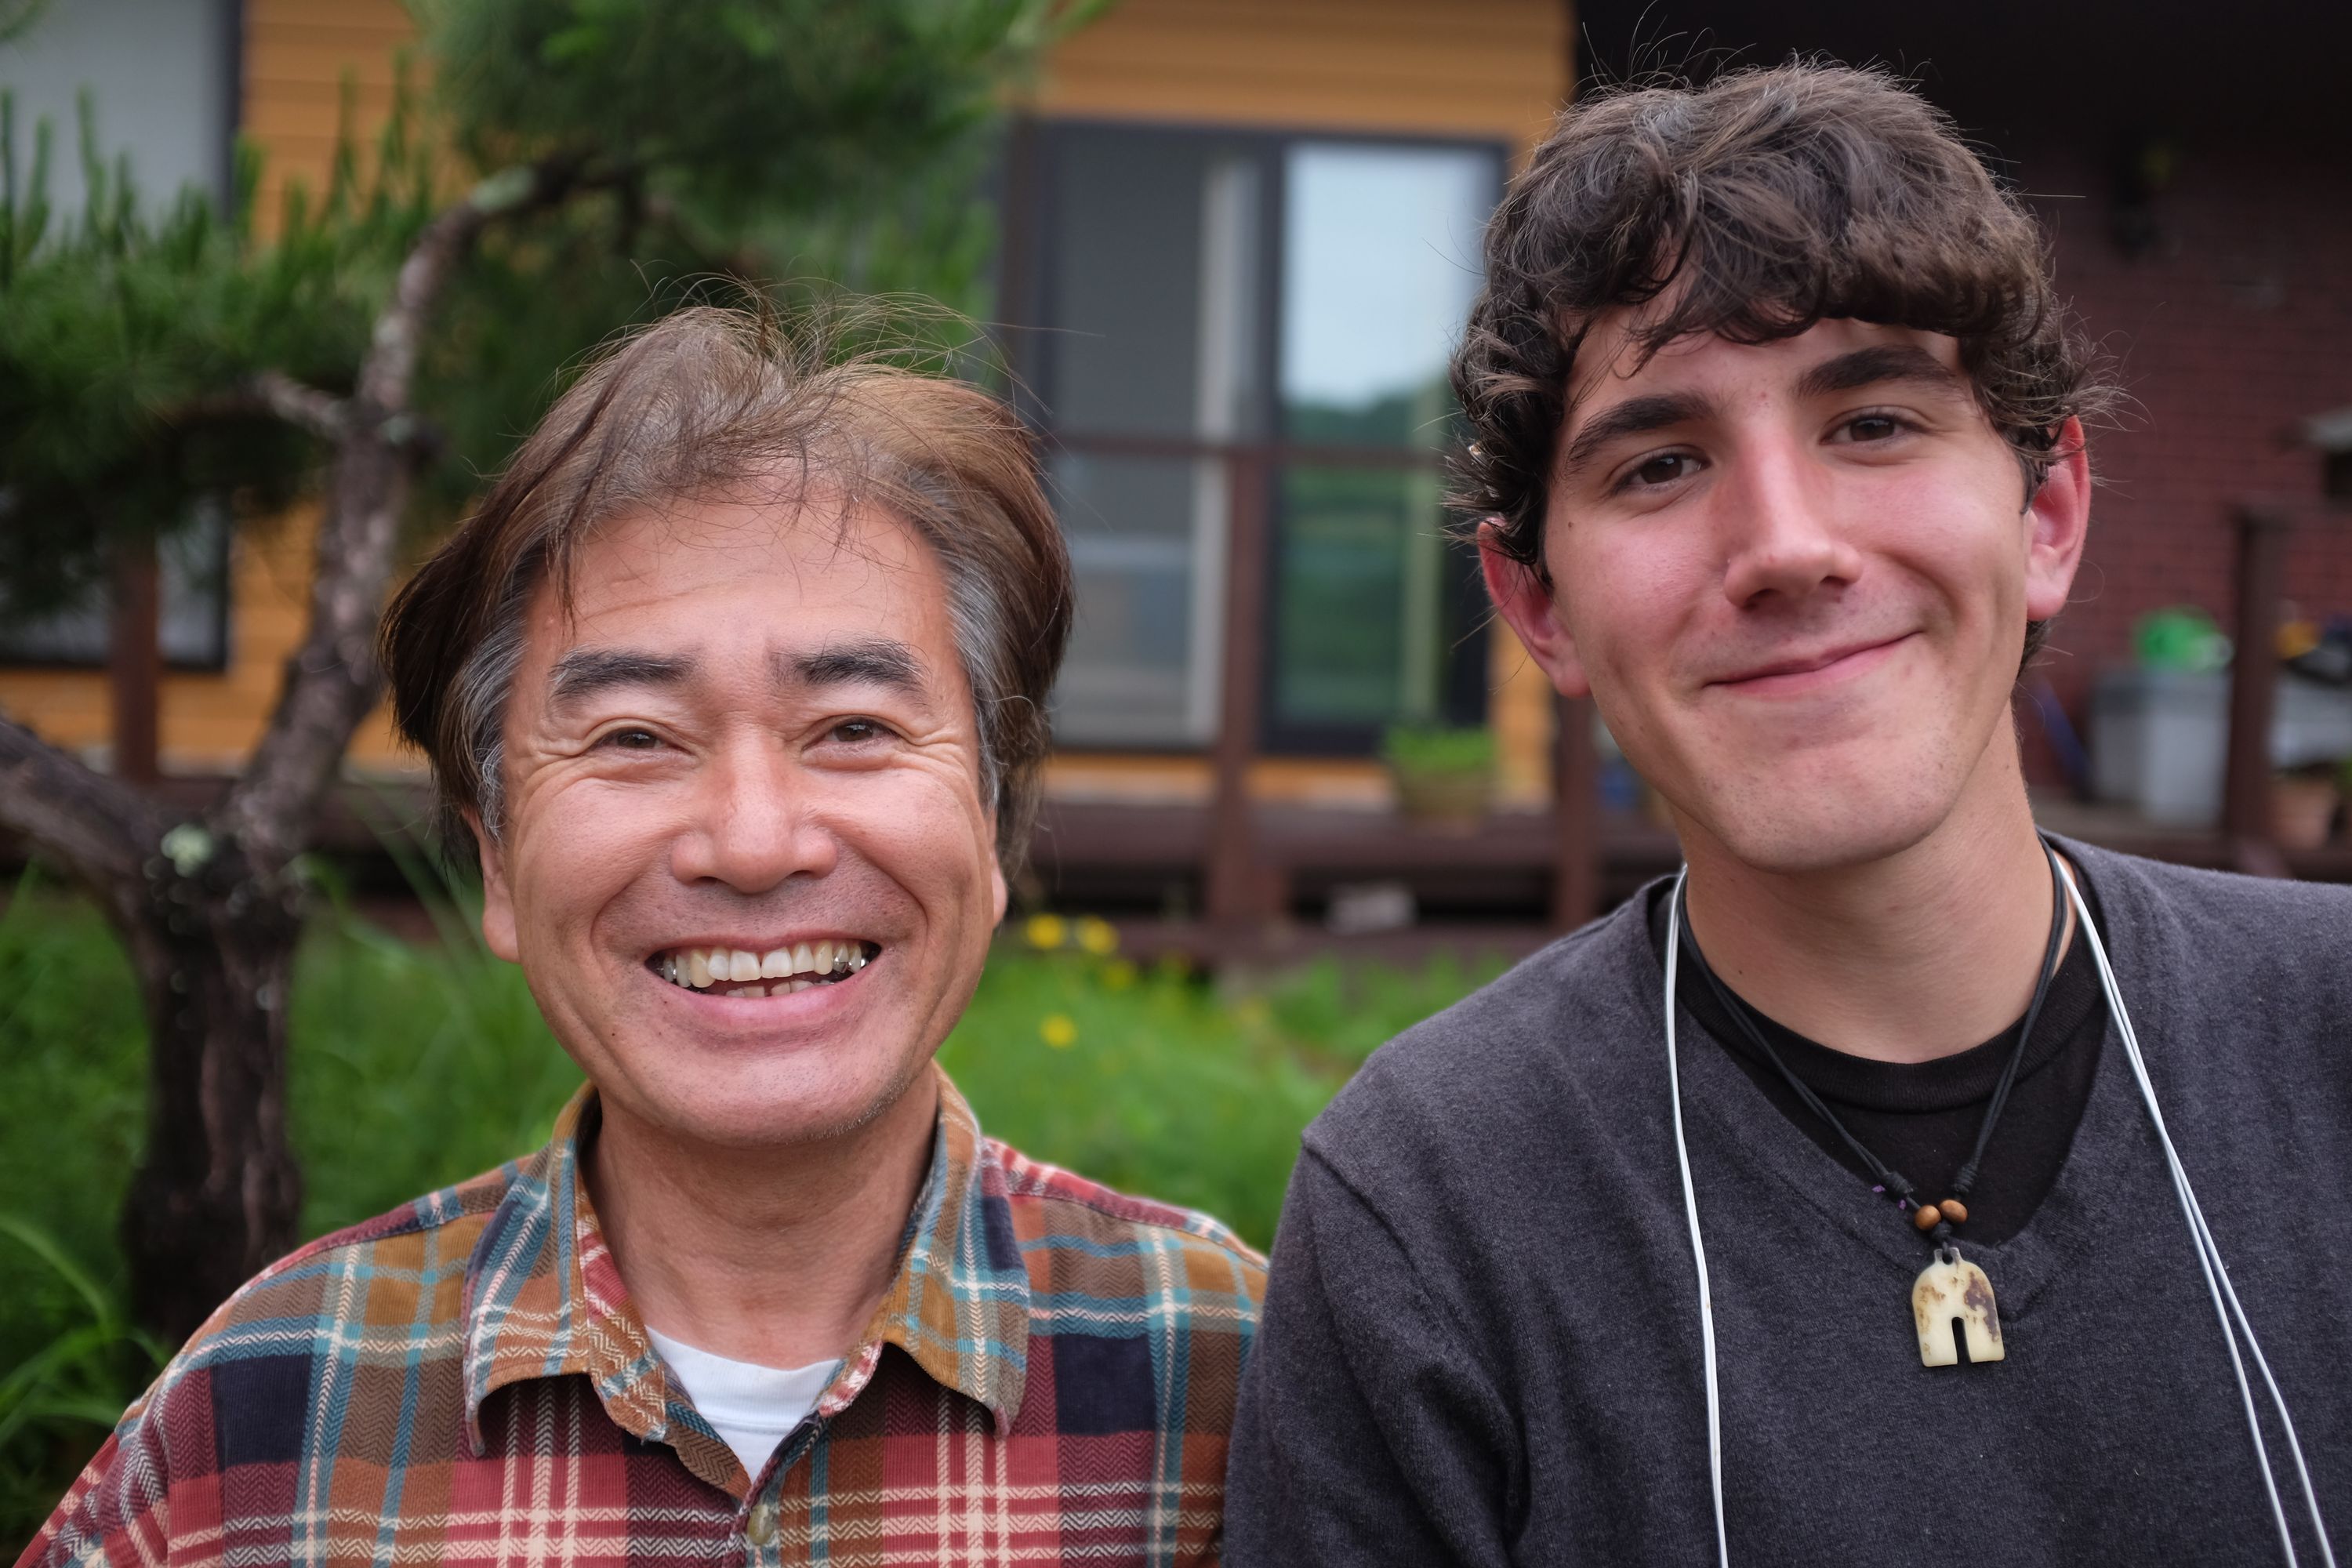 A Japanese man and an American boy smile into the camera.